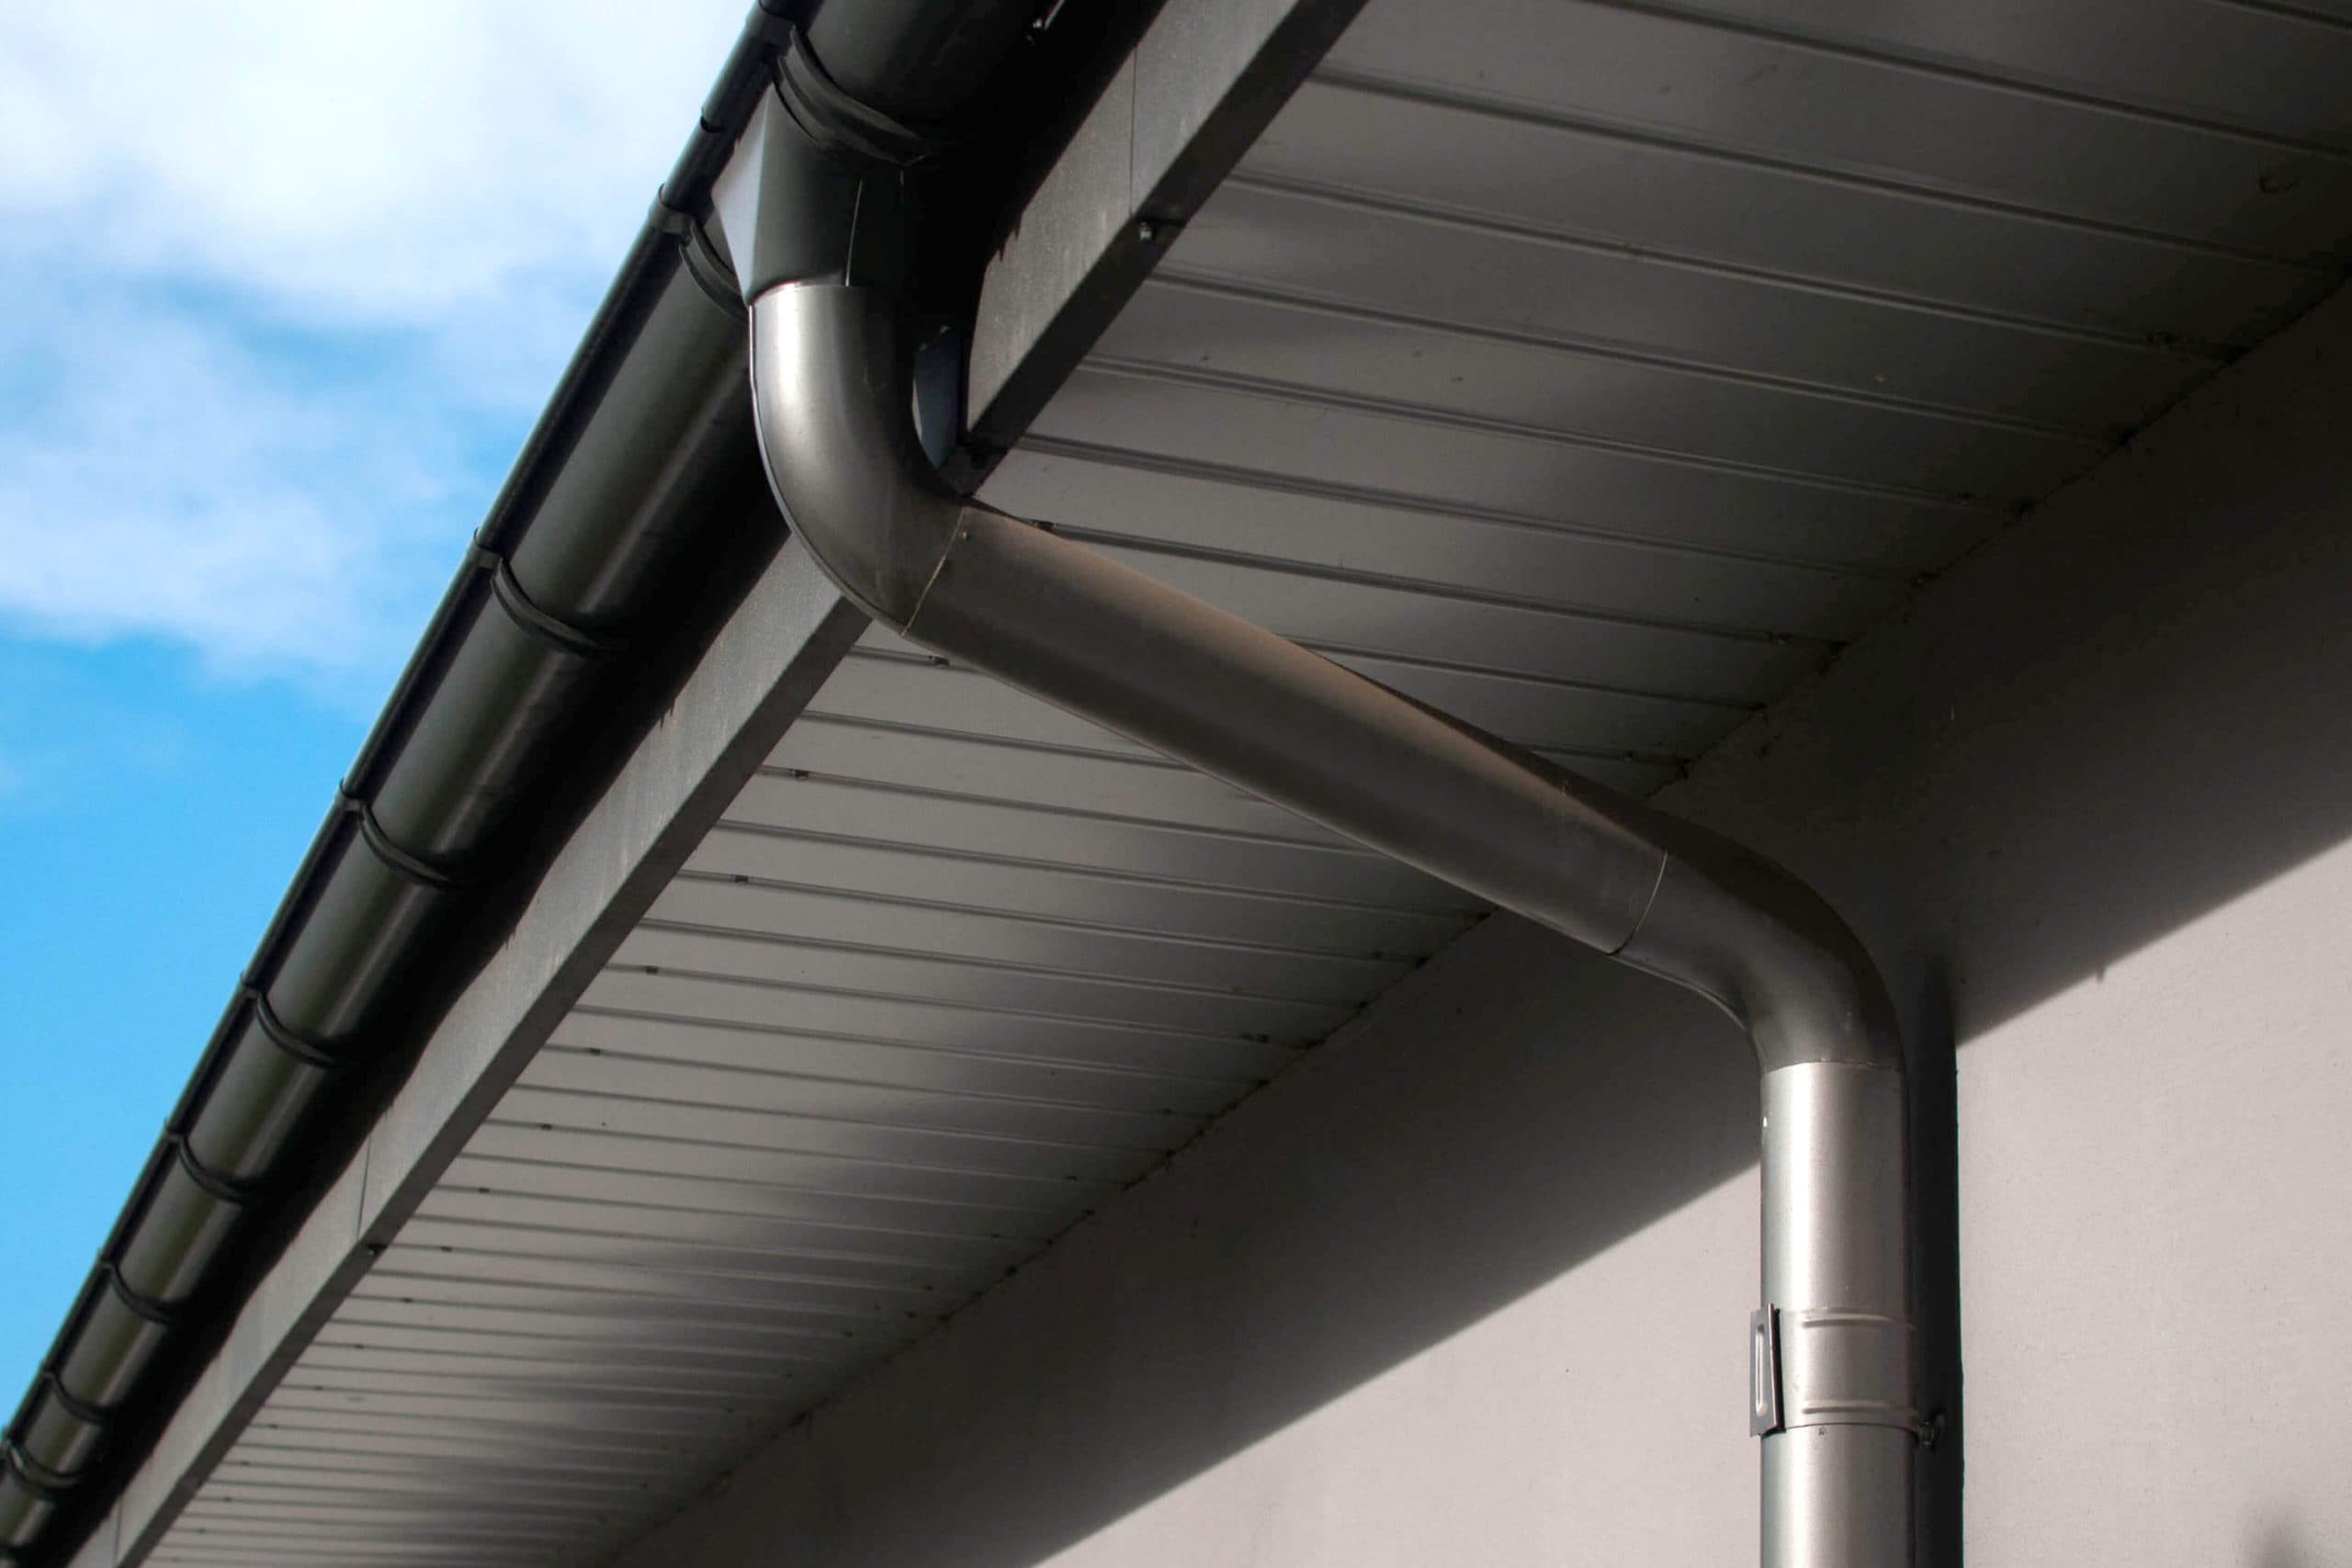 Reliable and affordable Galvanized gutters installation in Conroe